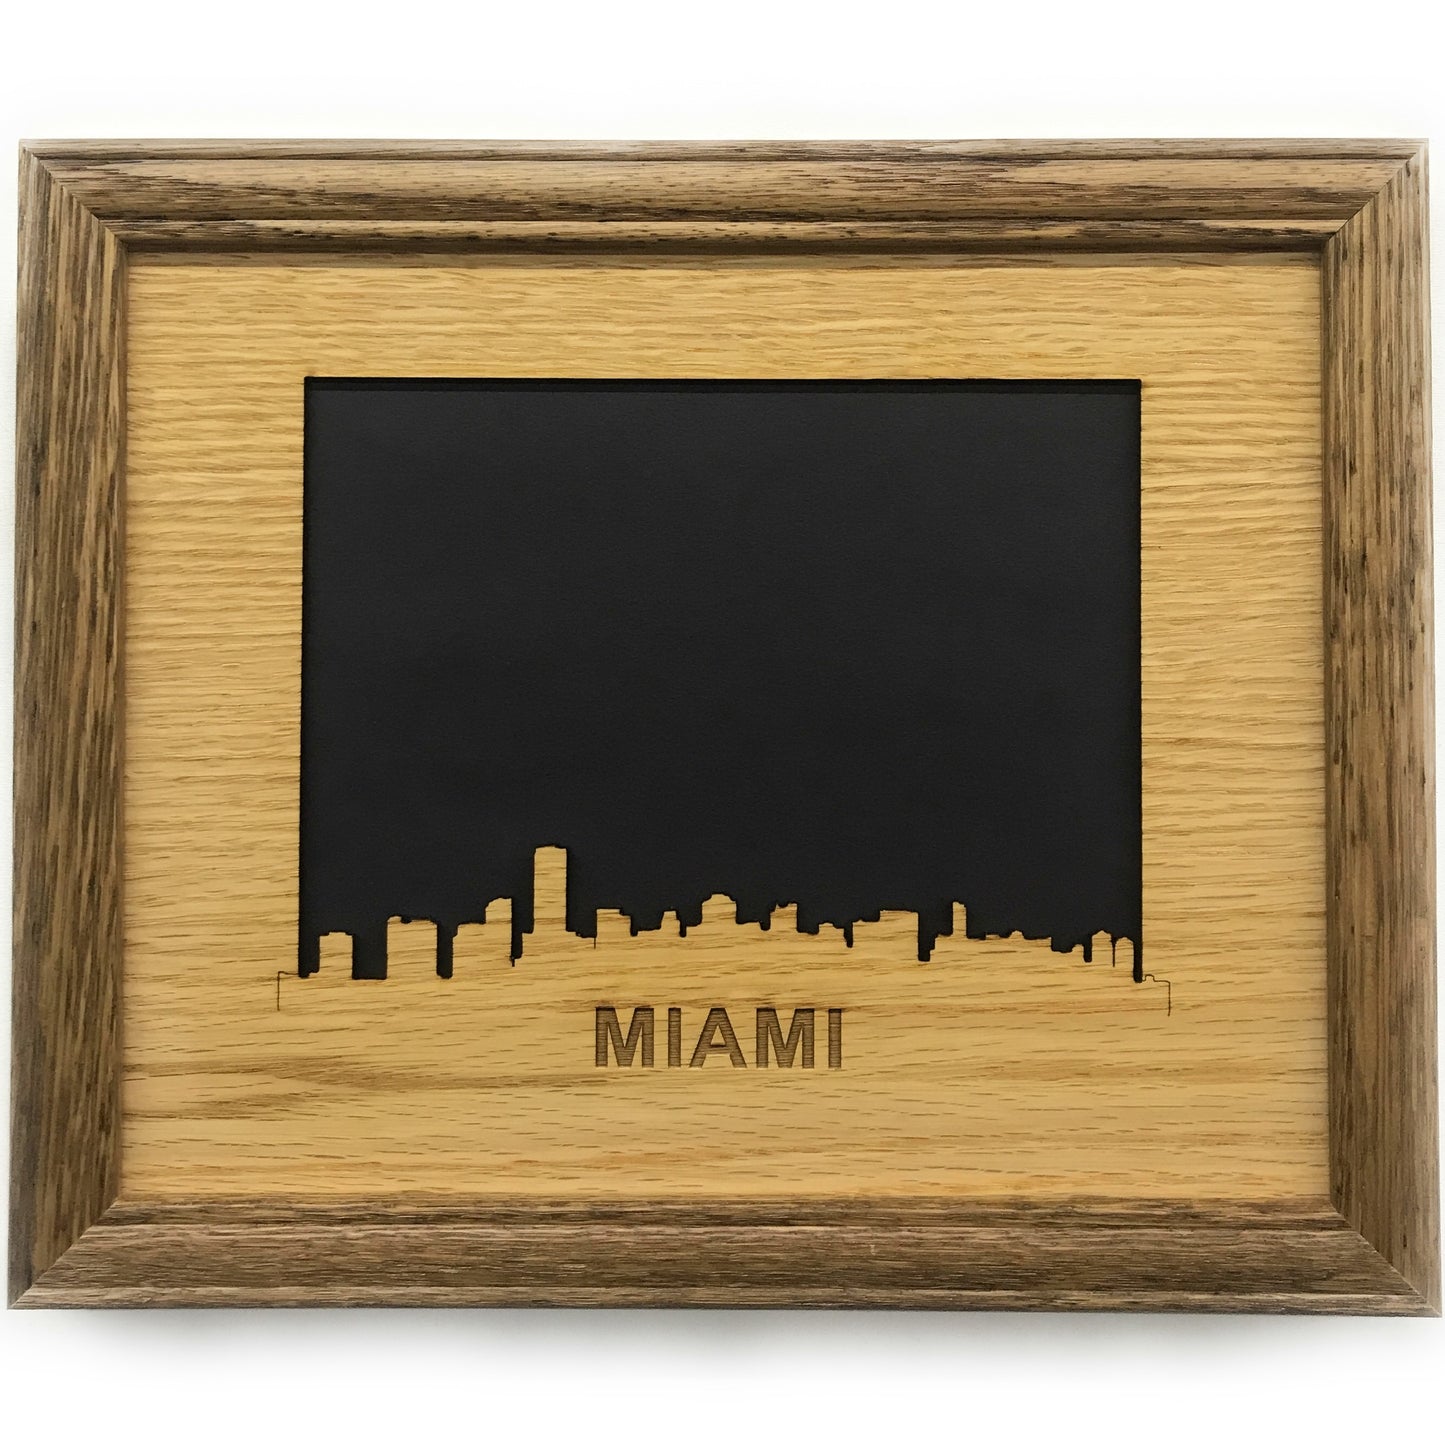 Miami Picture Frame - 8x10 Frame Hold 5x7 Photo